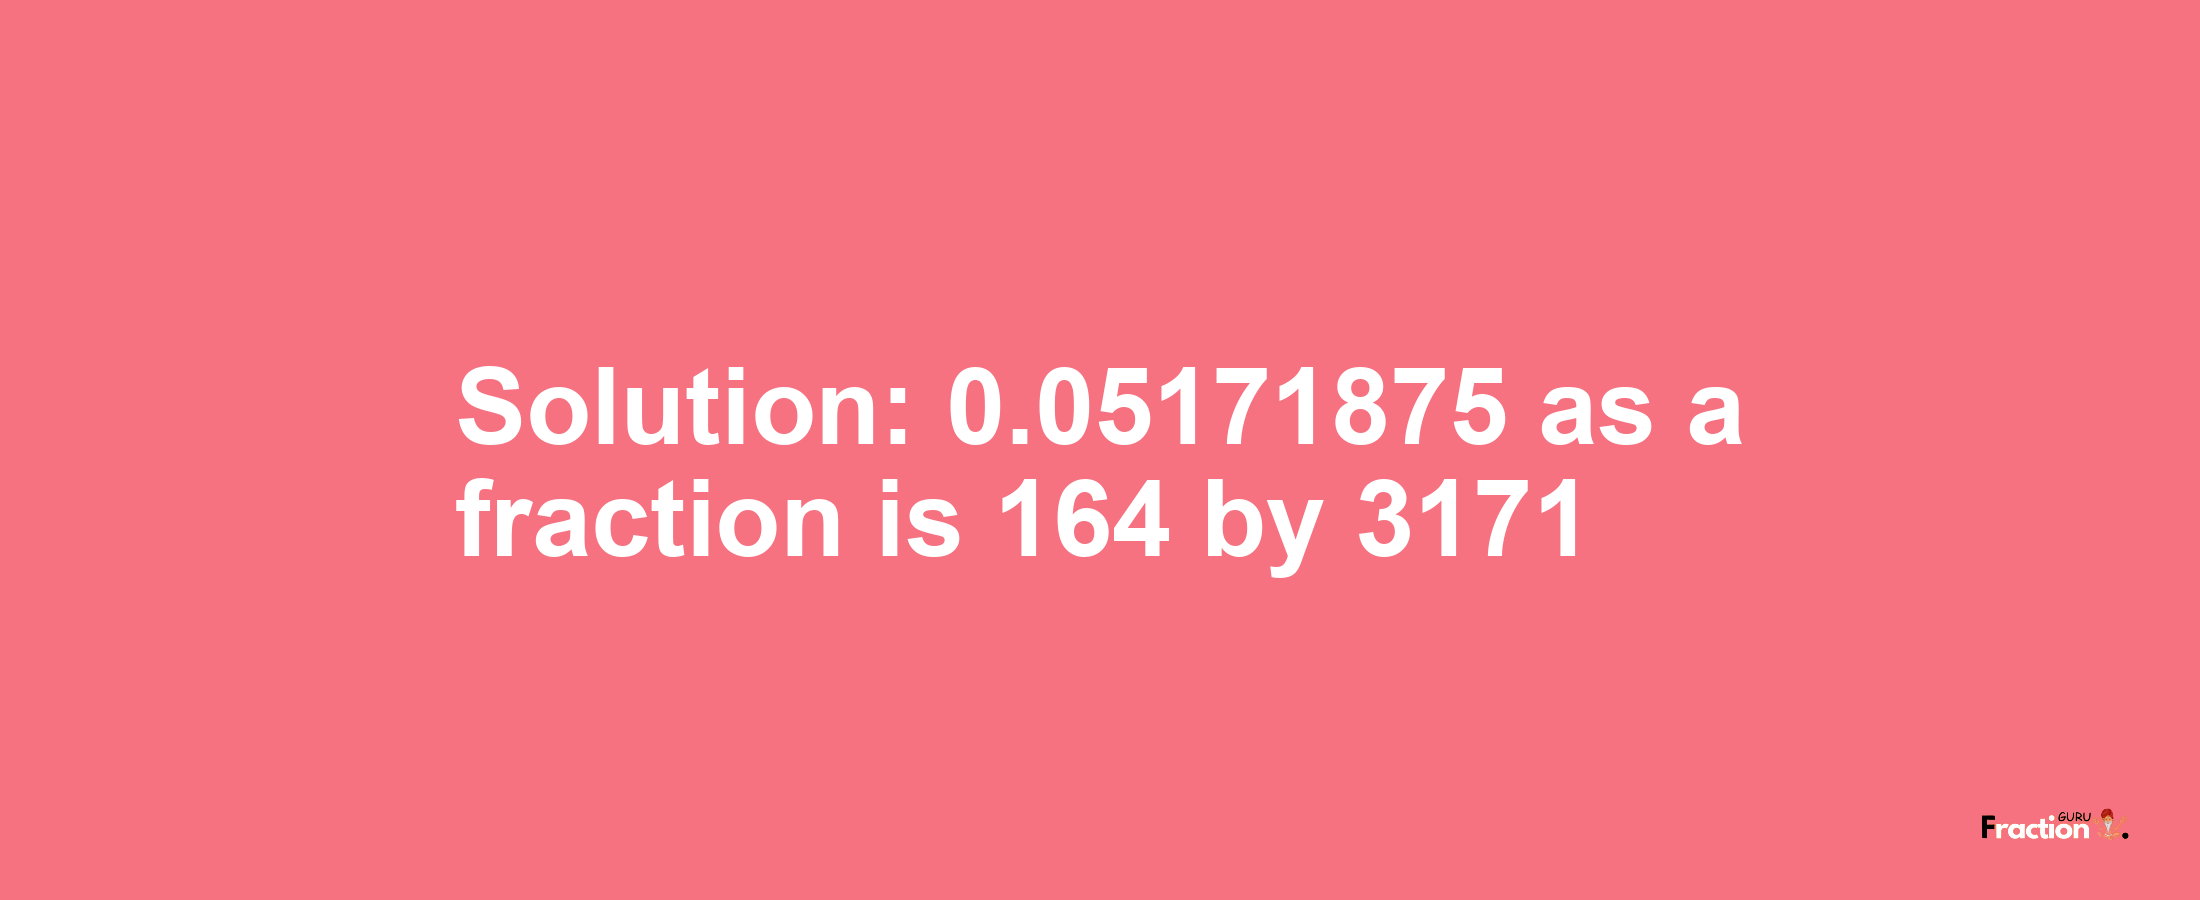 Solution:0.05171875 as a fraction is 164/3171